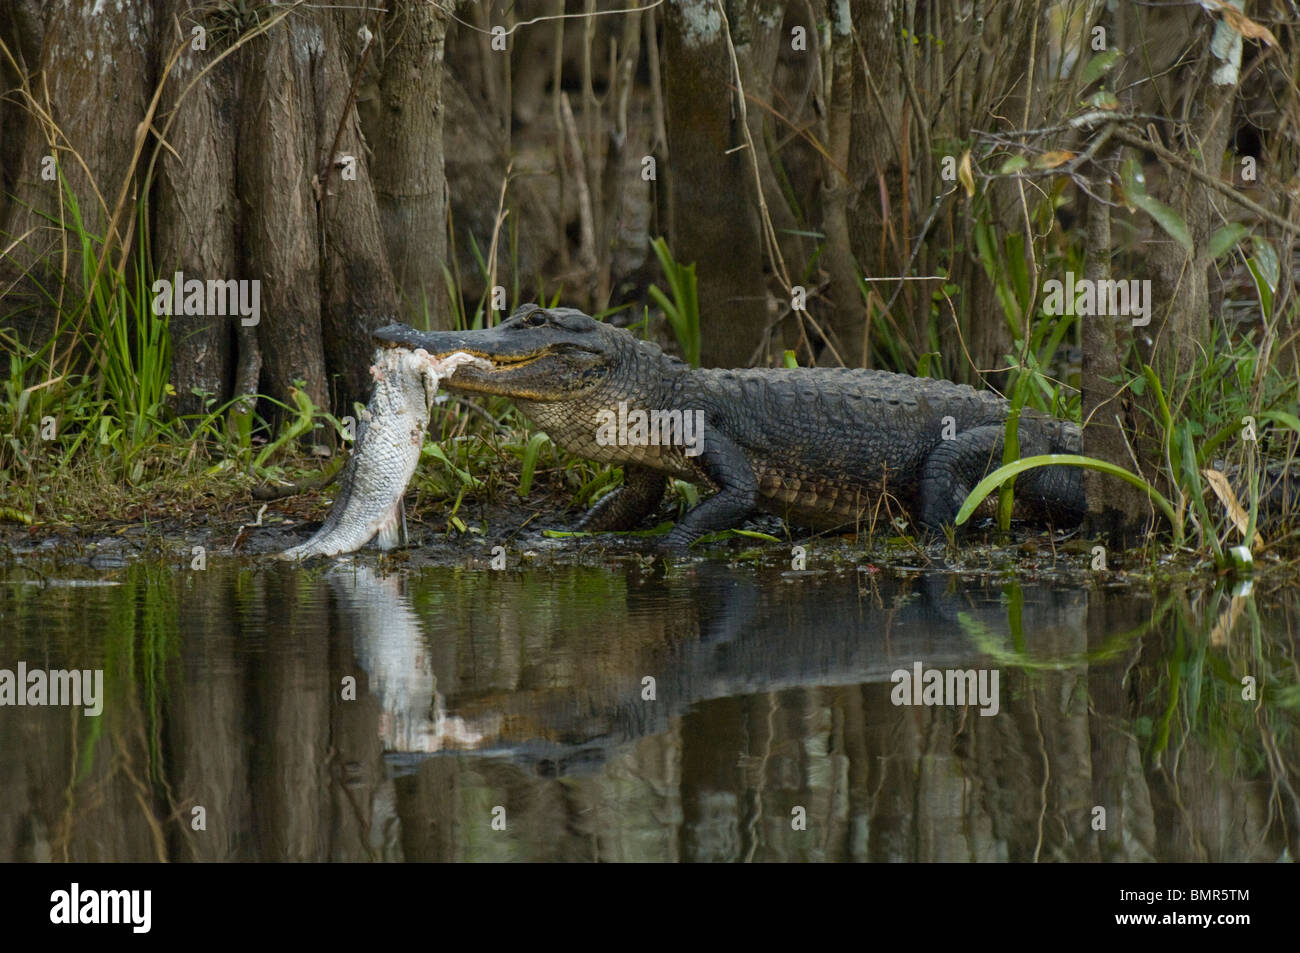 American Alligator (Alligator mississippiensis) feeding on a common snook in the Florida Everglades. Stock Photo